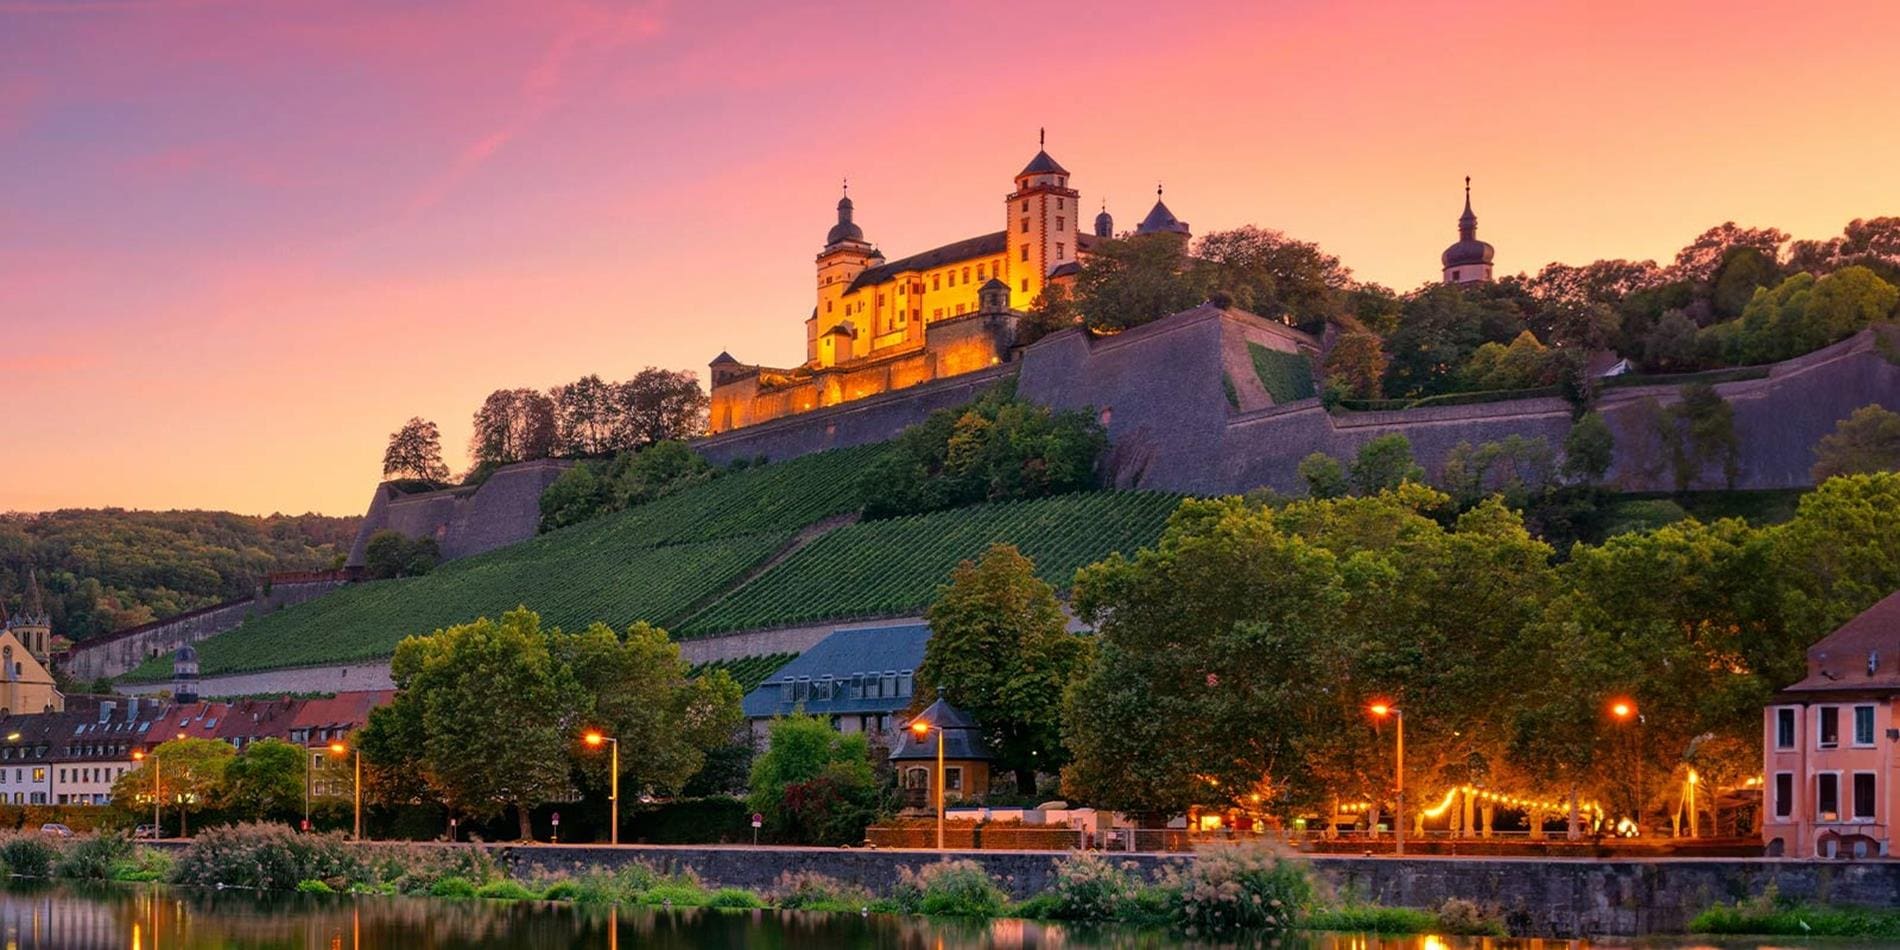 High on the hill at sunset, sits Marienberg Fortress in Wurzburg